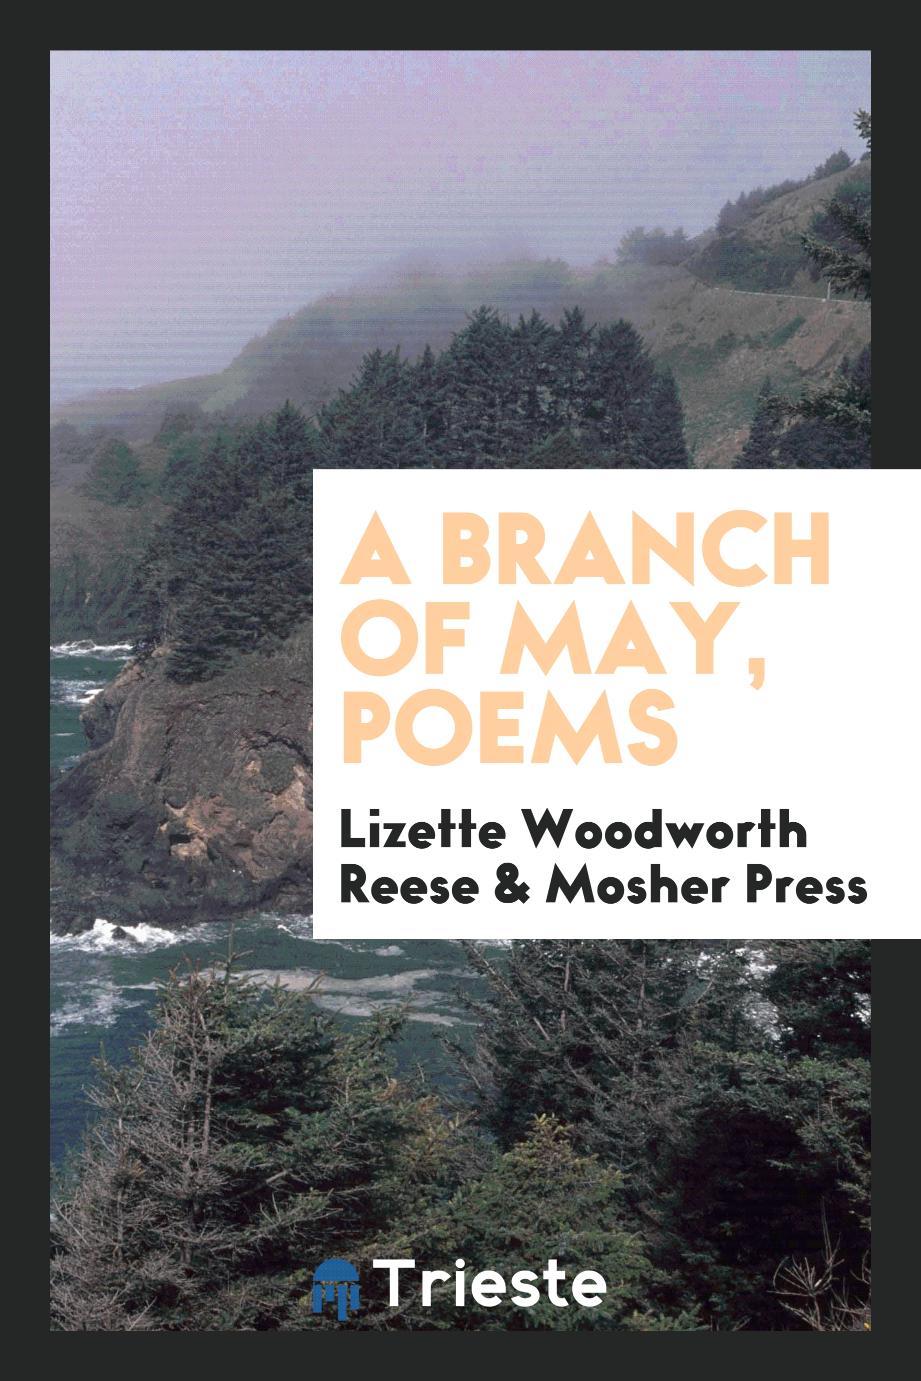 A branch of May, poems